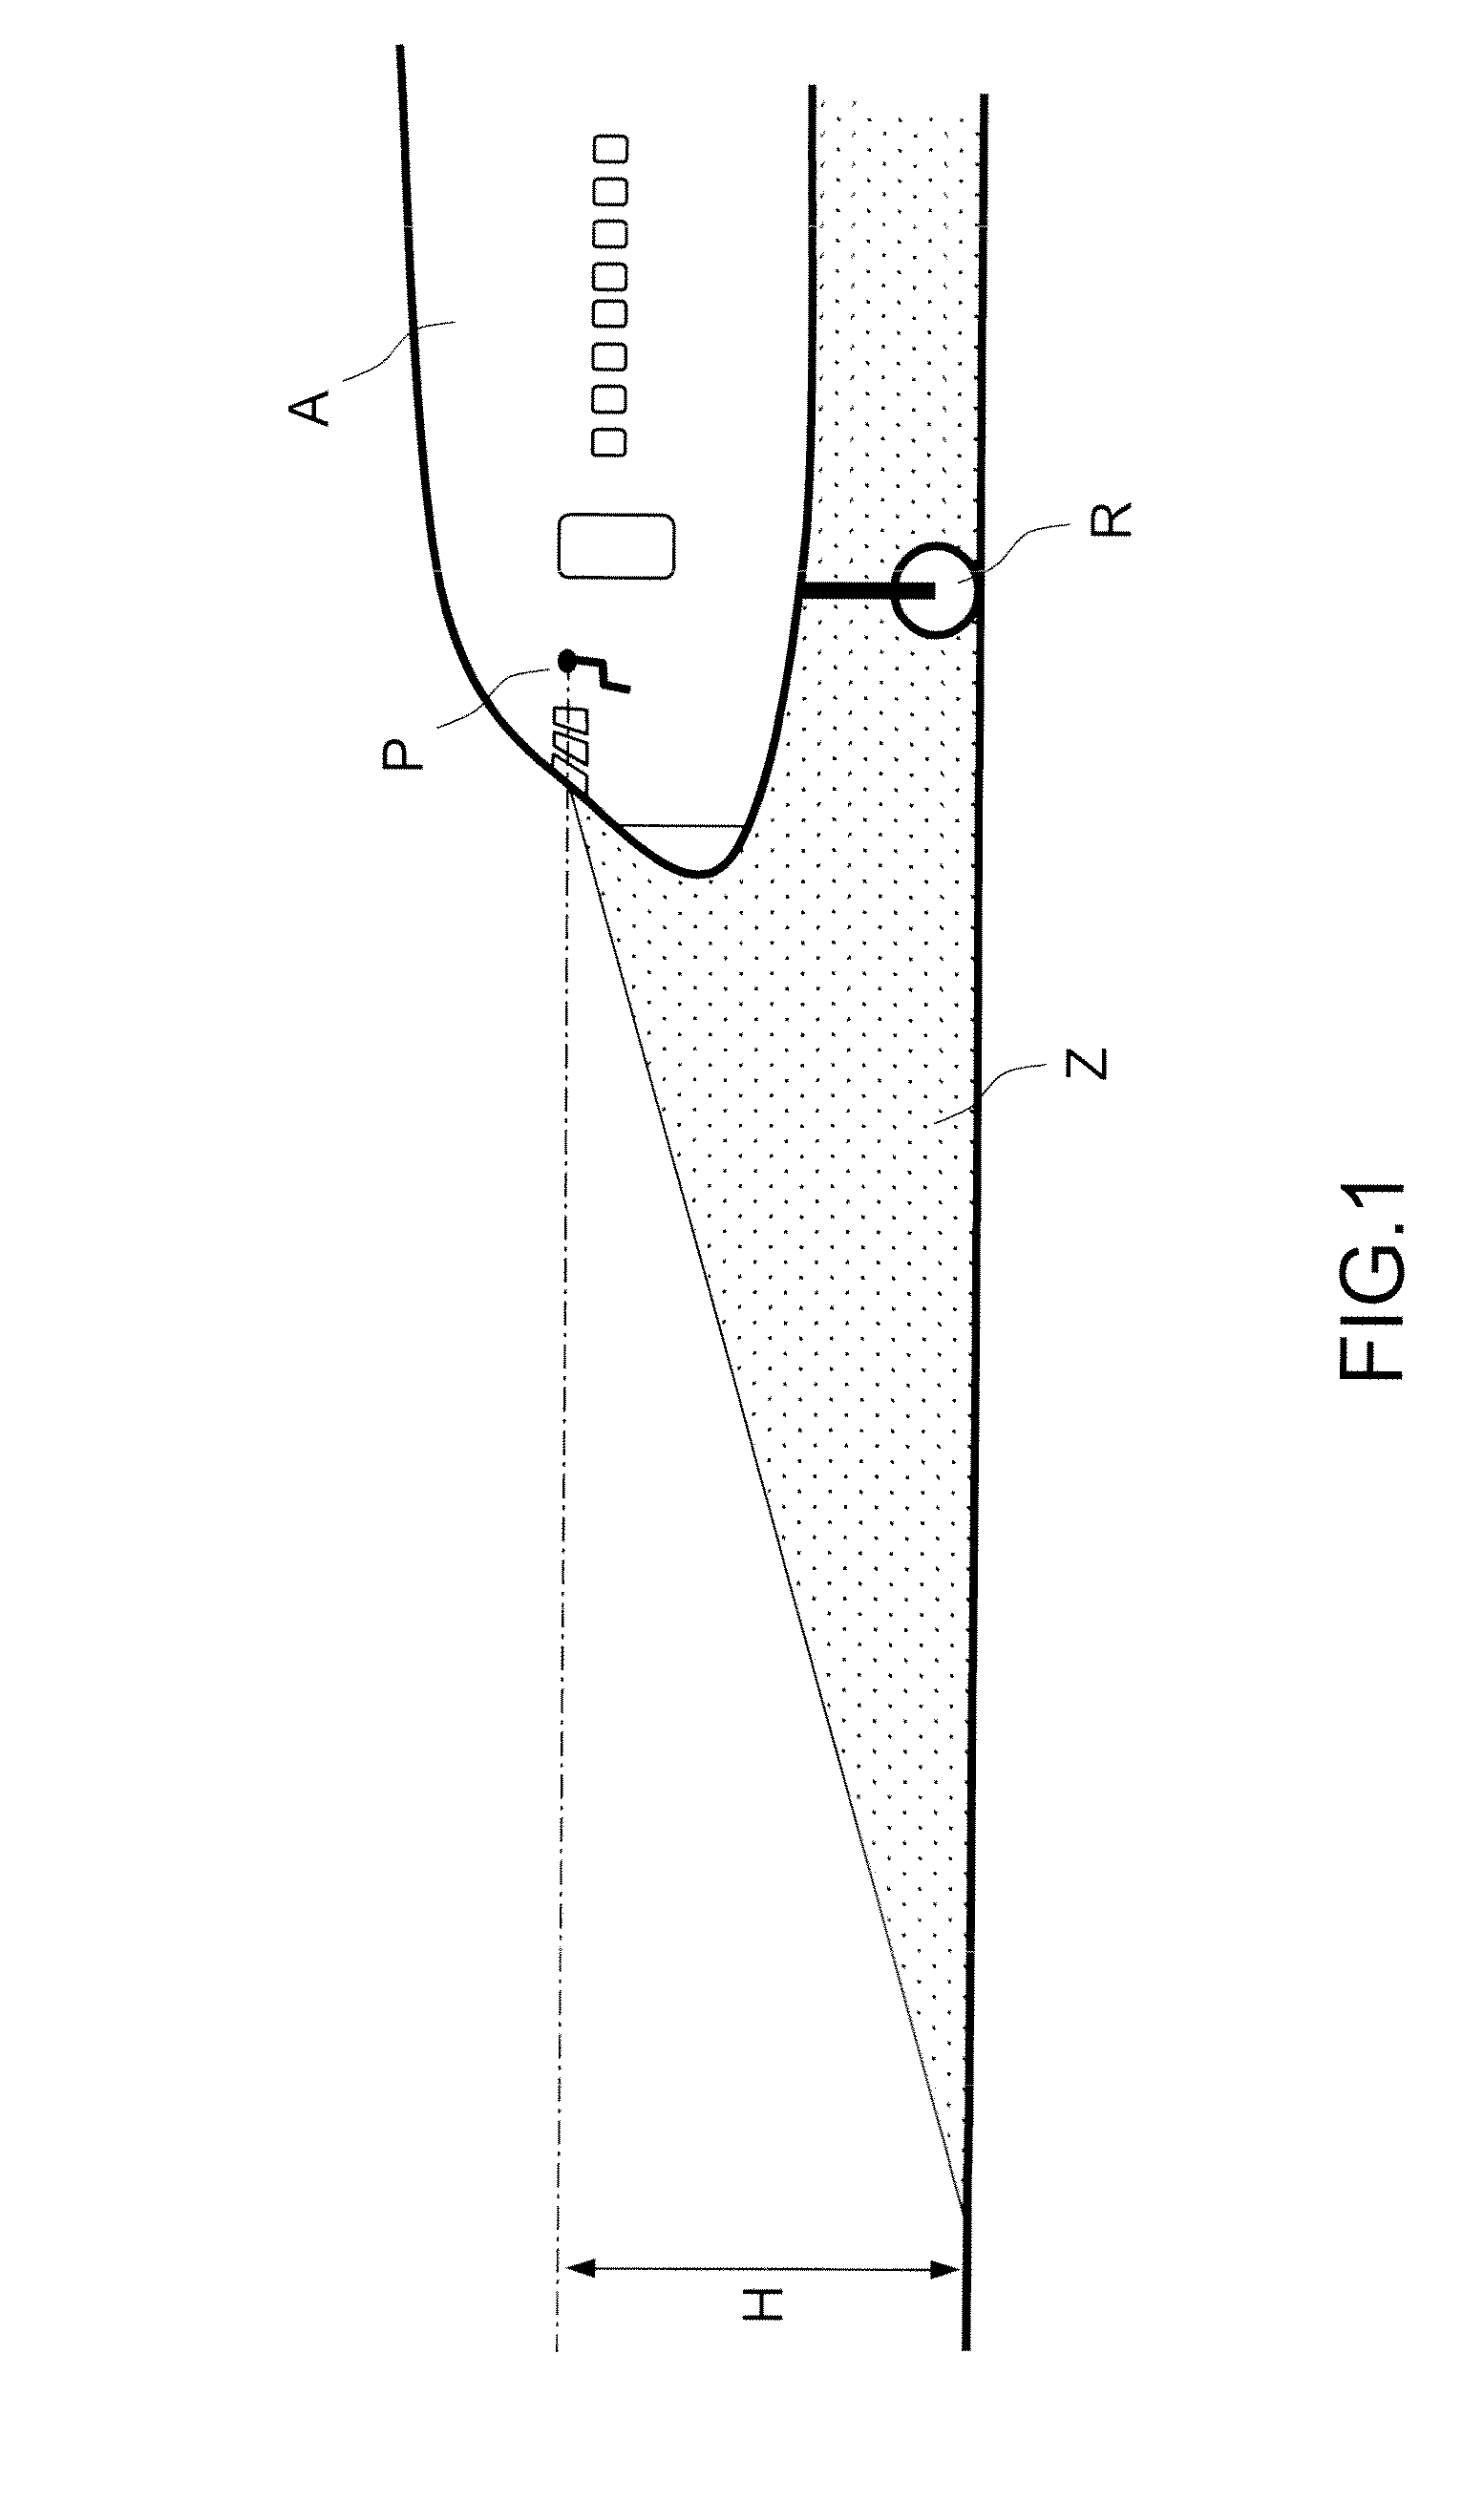 Optoelectronic Device for Assisting Aircraft Taxing Comprising Dedicated Imaging